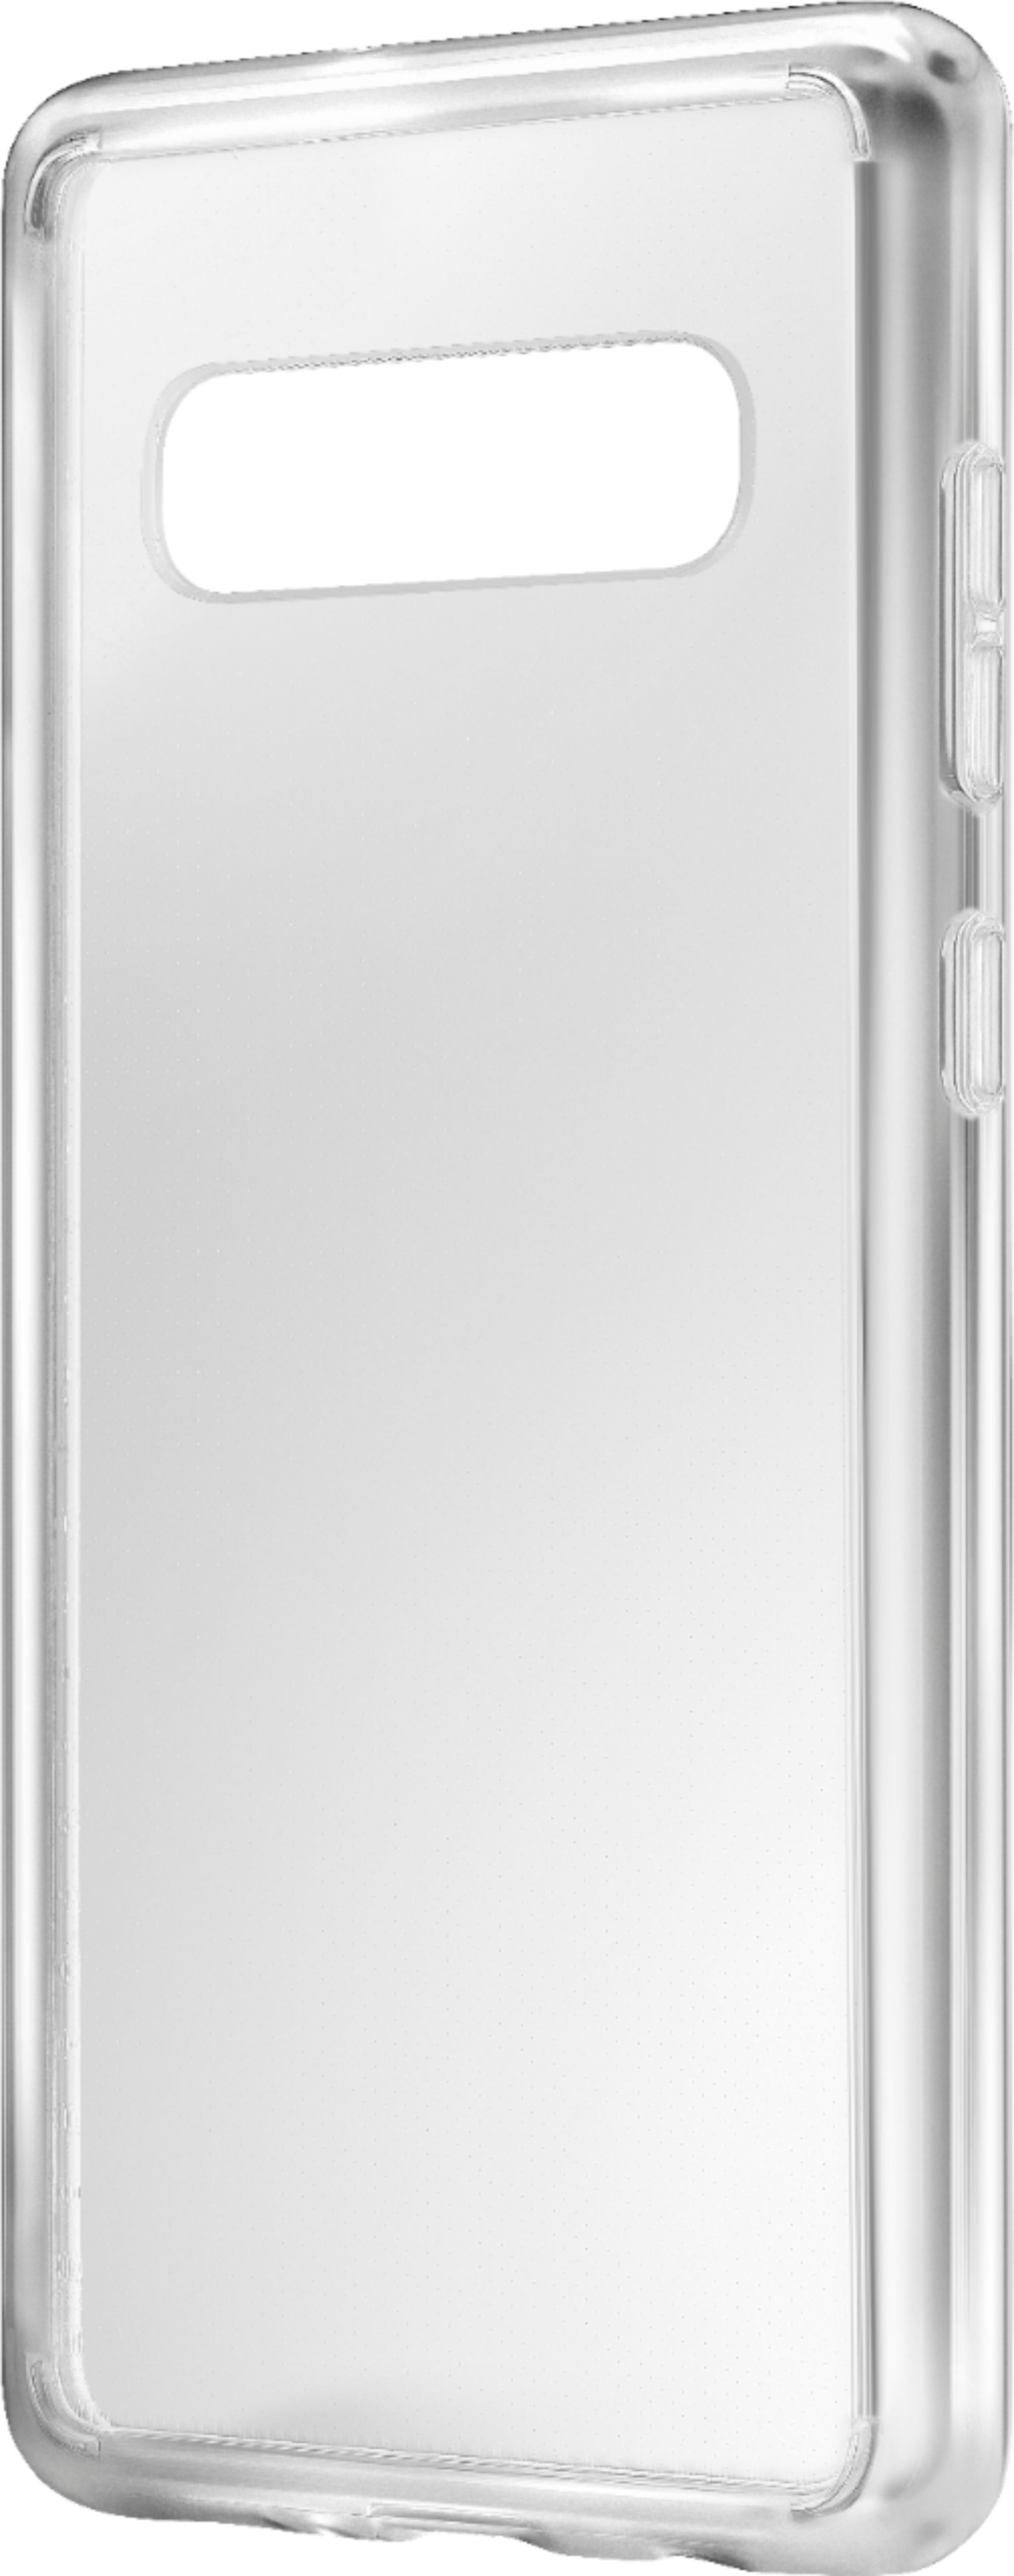 Insignia™ - Hard Shell Case for Samsung Galaxy S10+ - Transparent